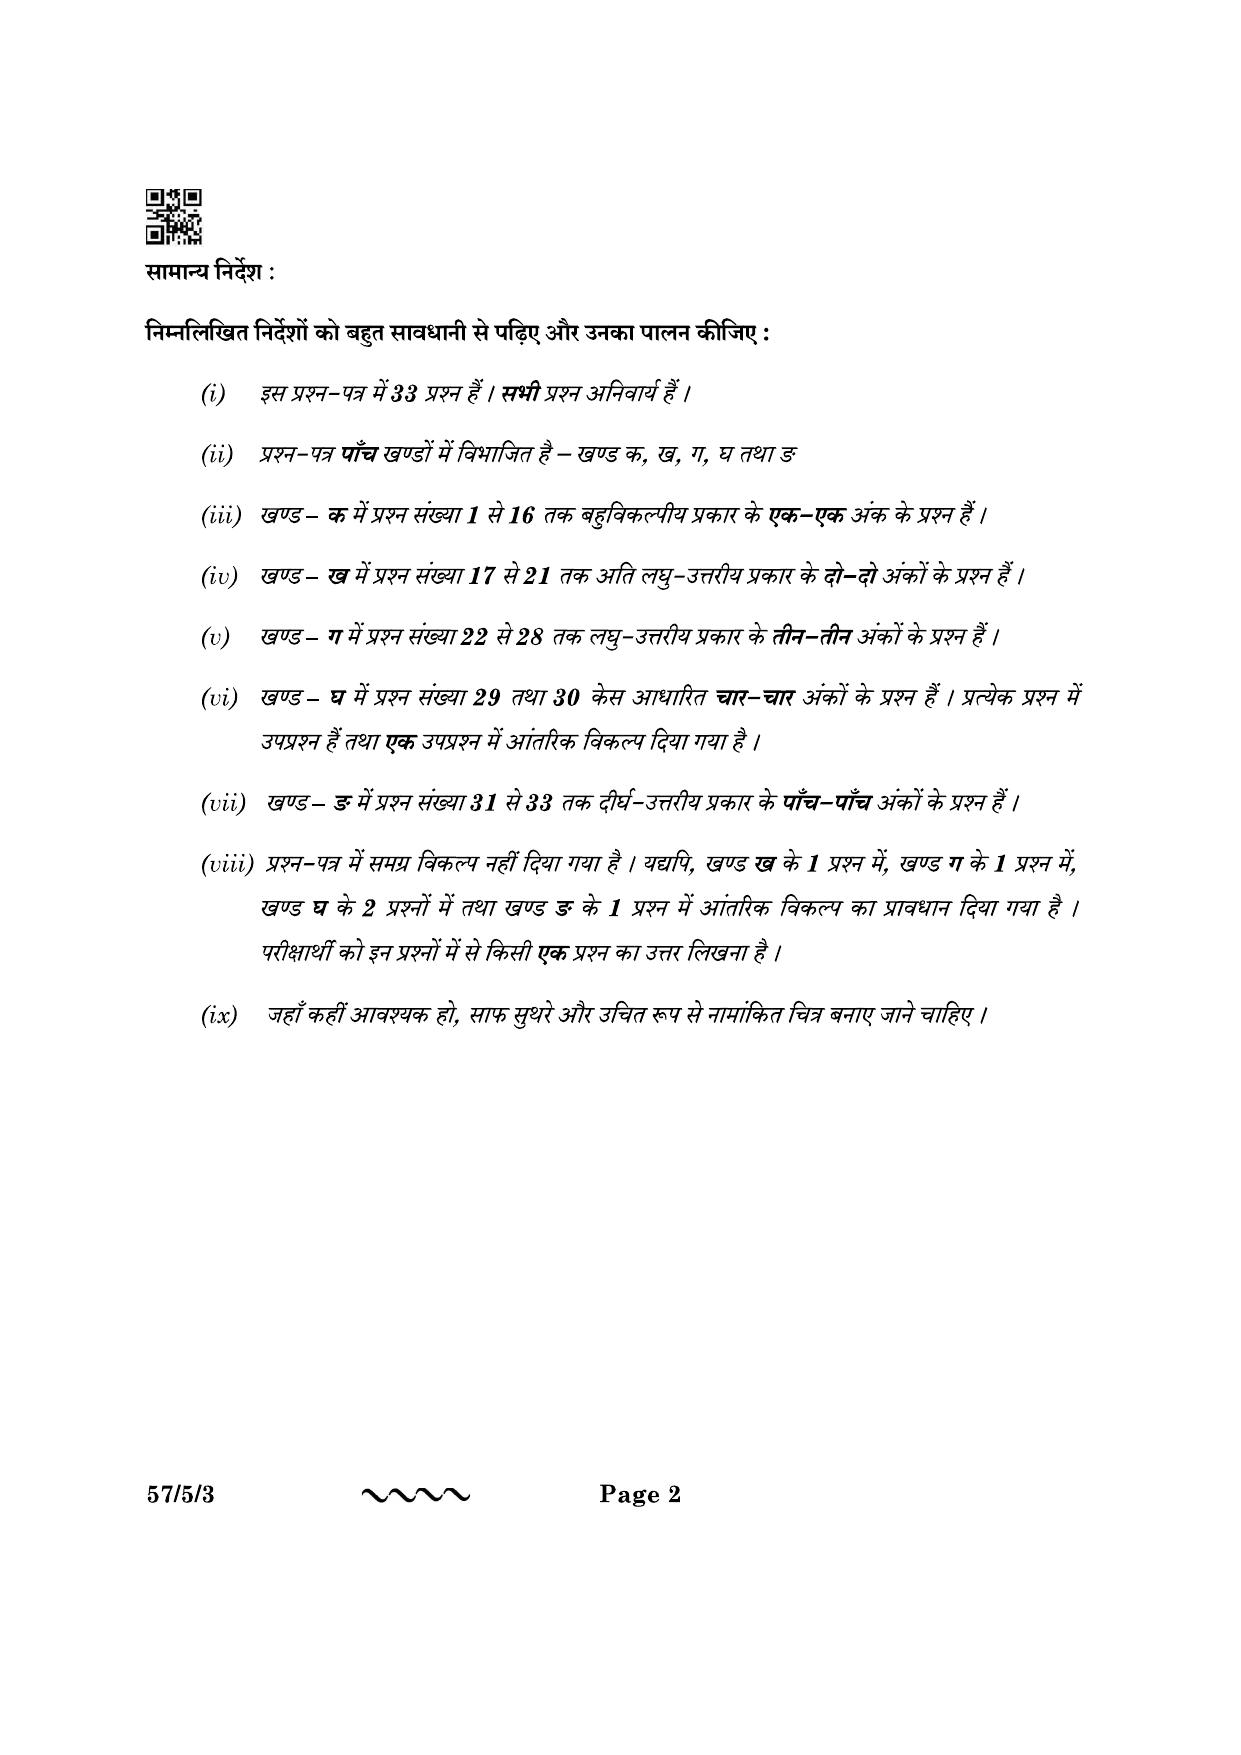 CBSE Class 12 57-5-3 Biology 2023 Question Paper - Page 2